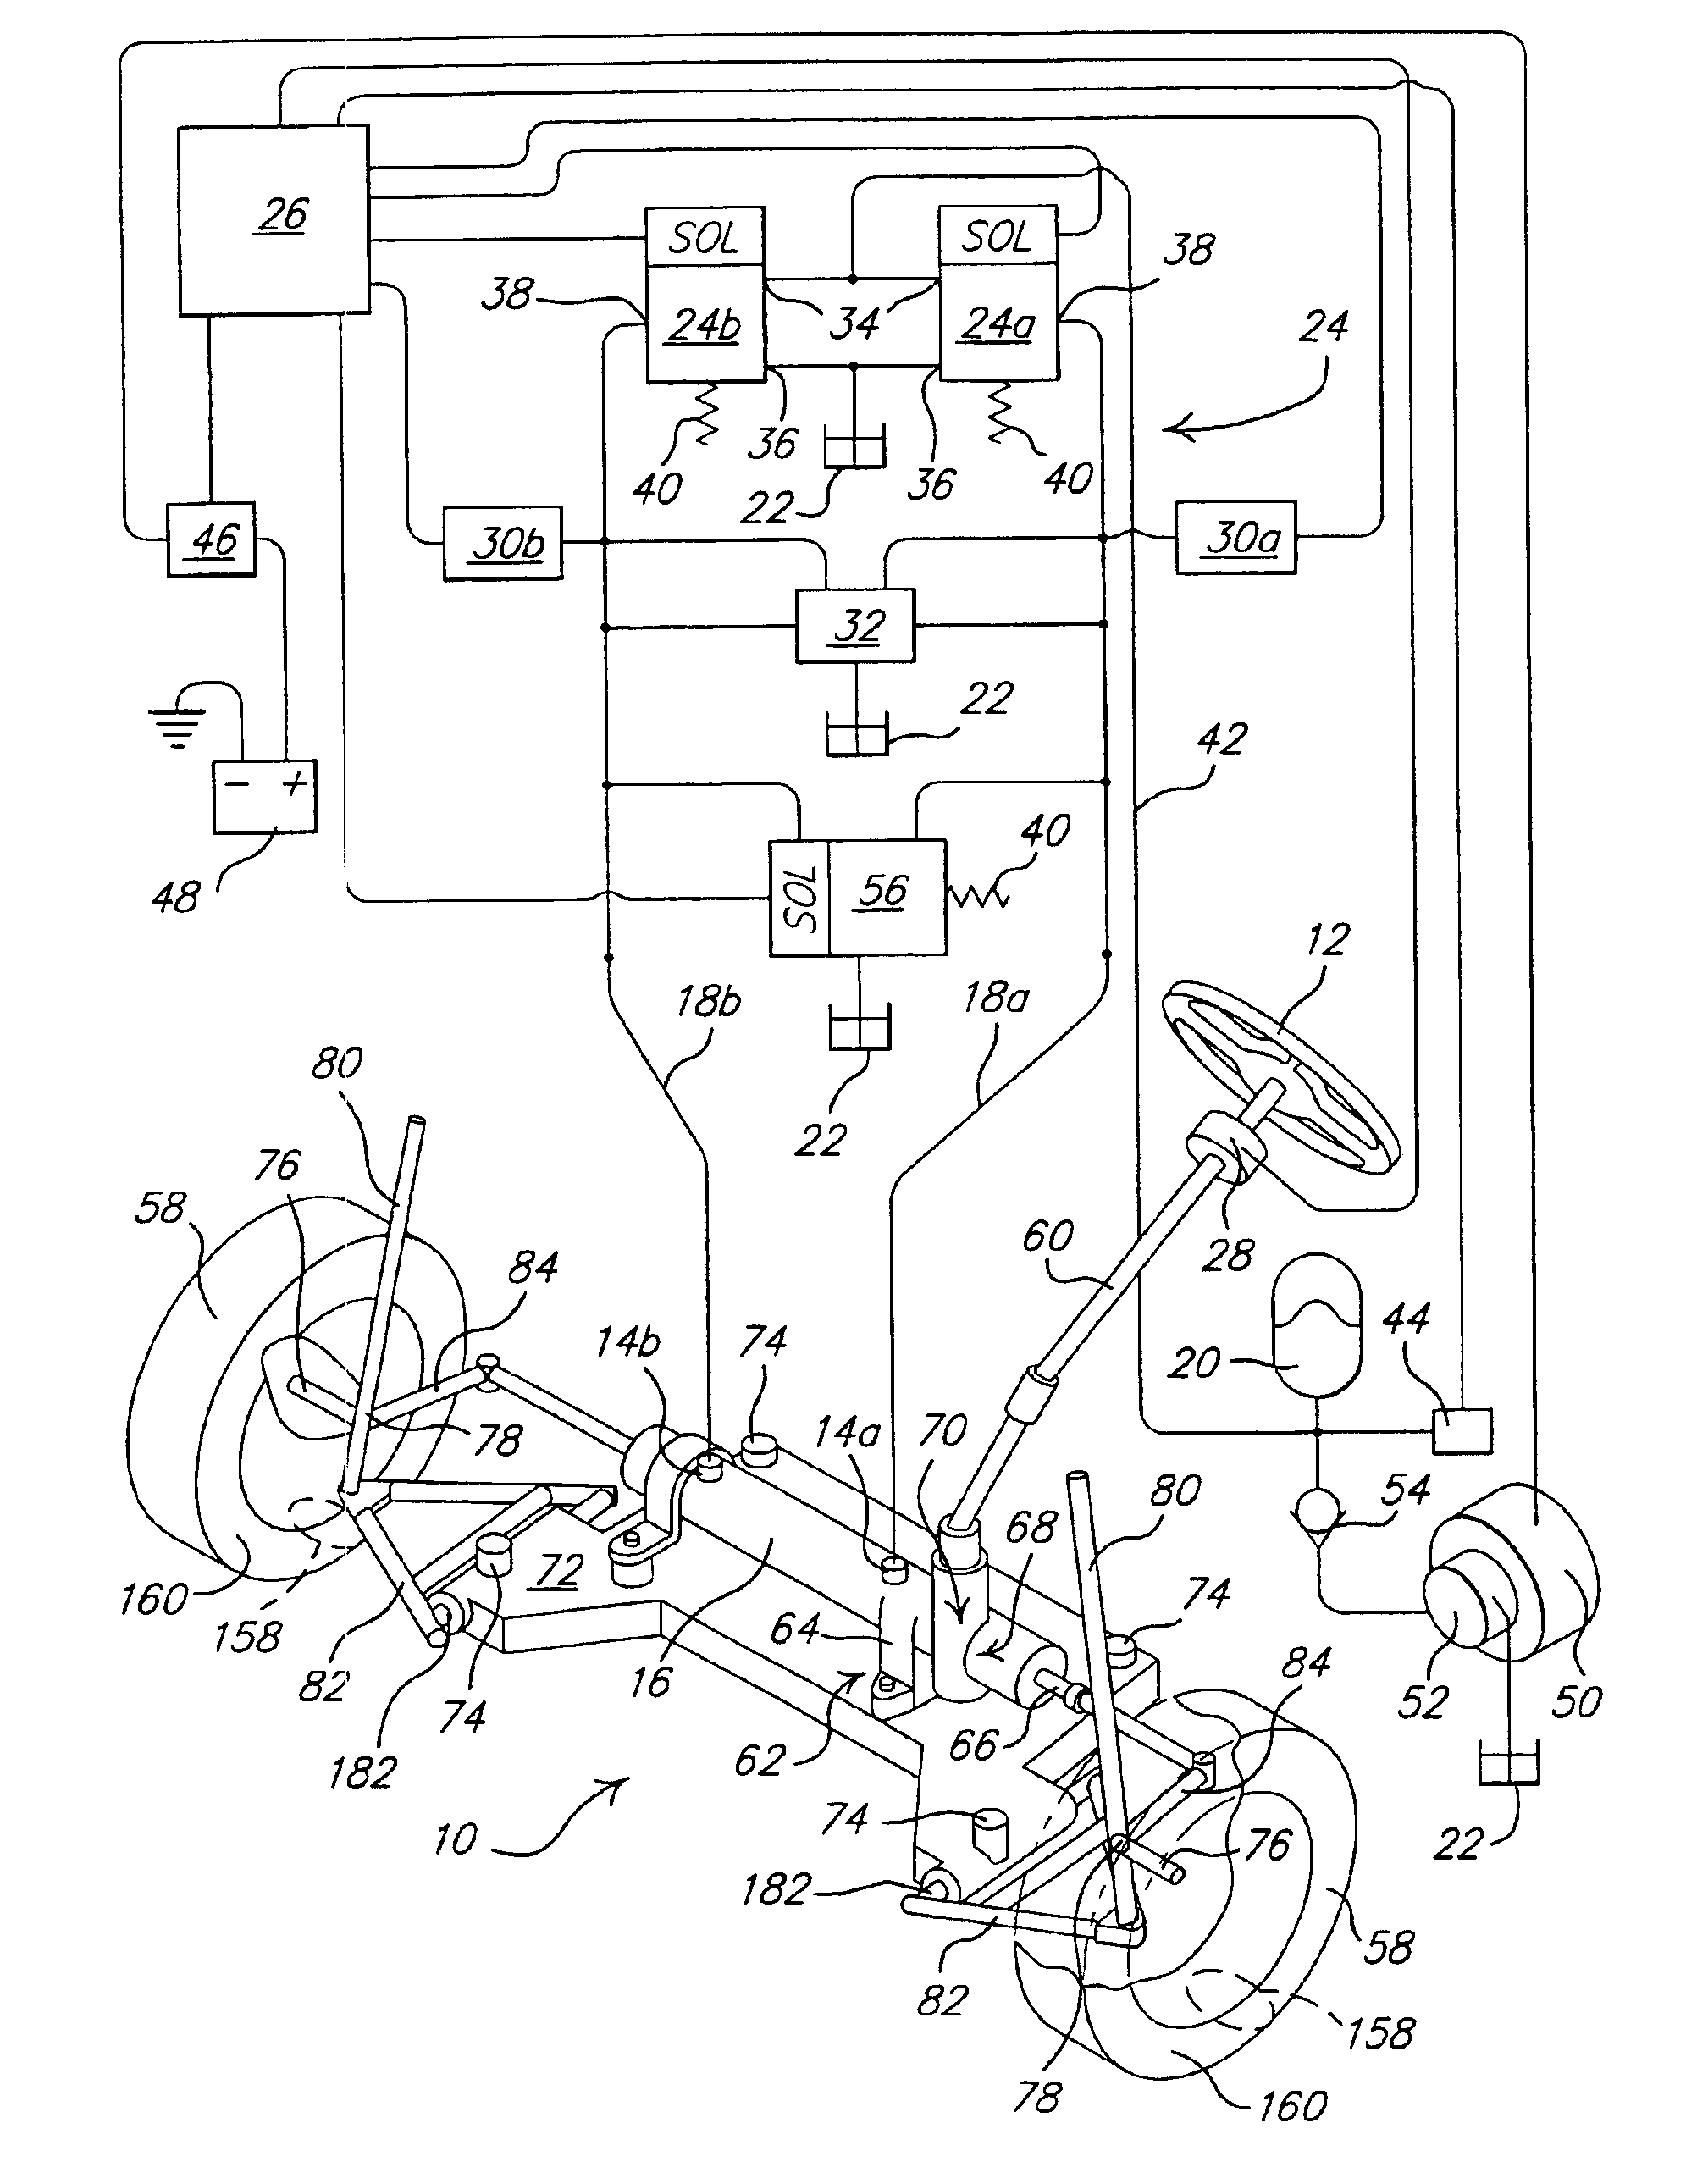 Force-based power steering system